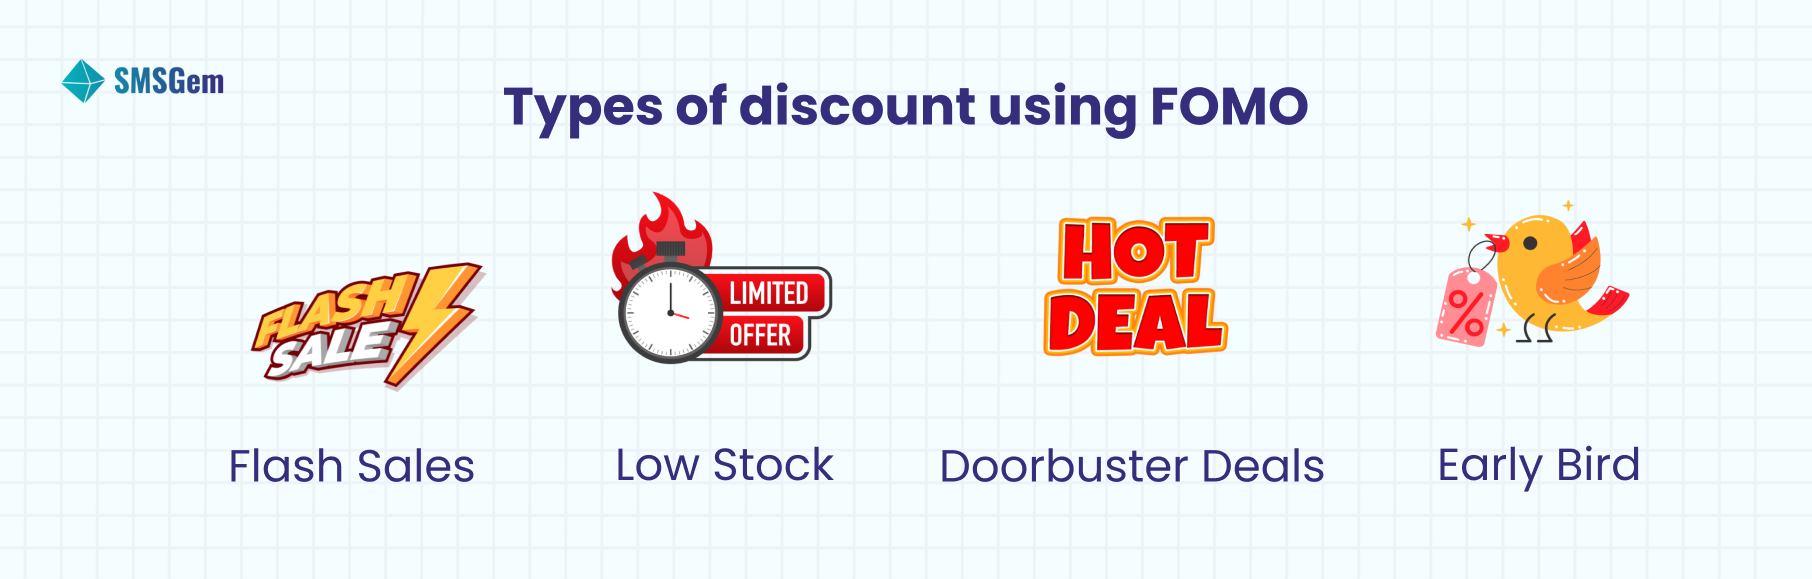 Types of discount applying FOMO effect